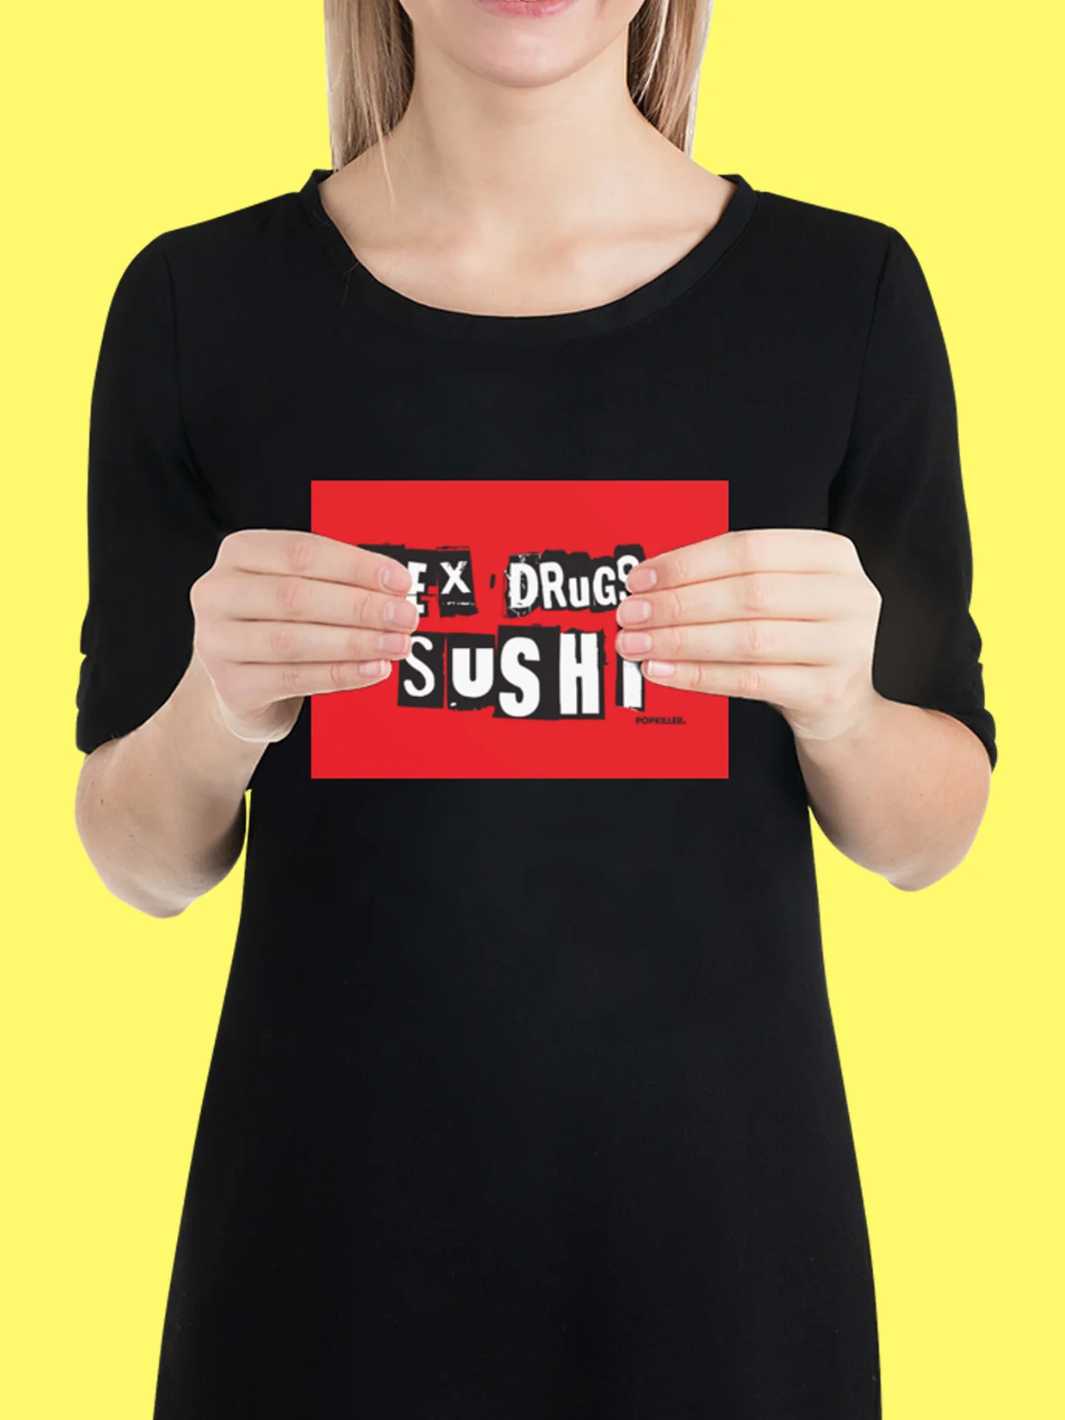 SEX DRUGS AND SUSHI Poster